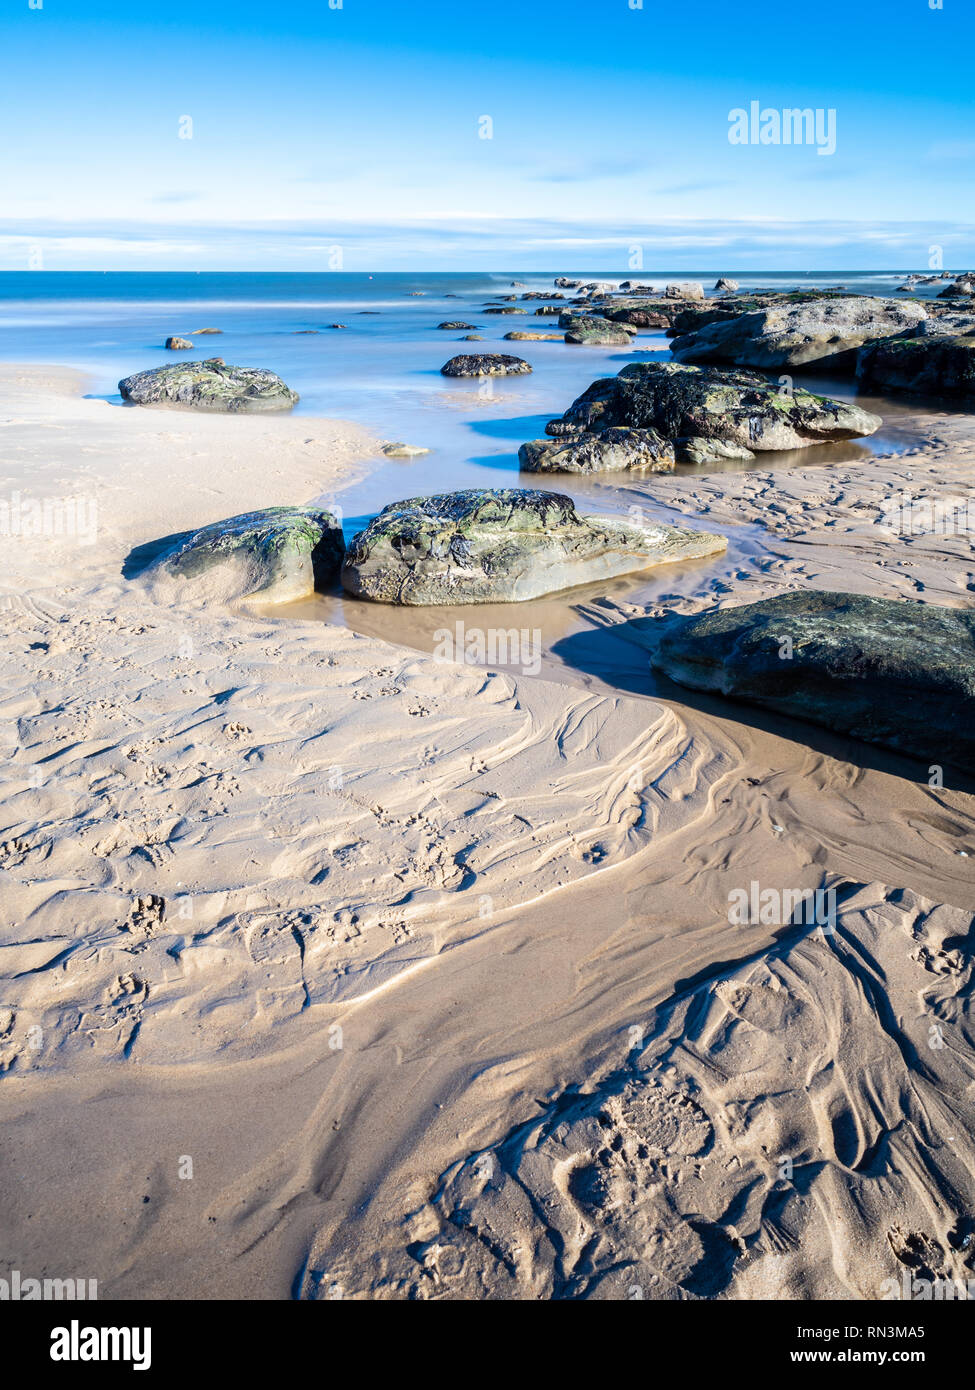 Small streams and rocks create patterns in the sands of Longsands Beach at Tynemouth. Stock Photo